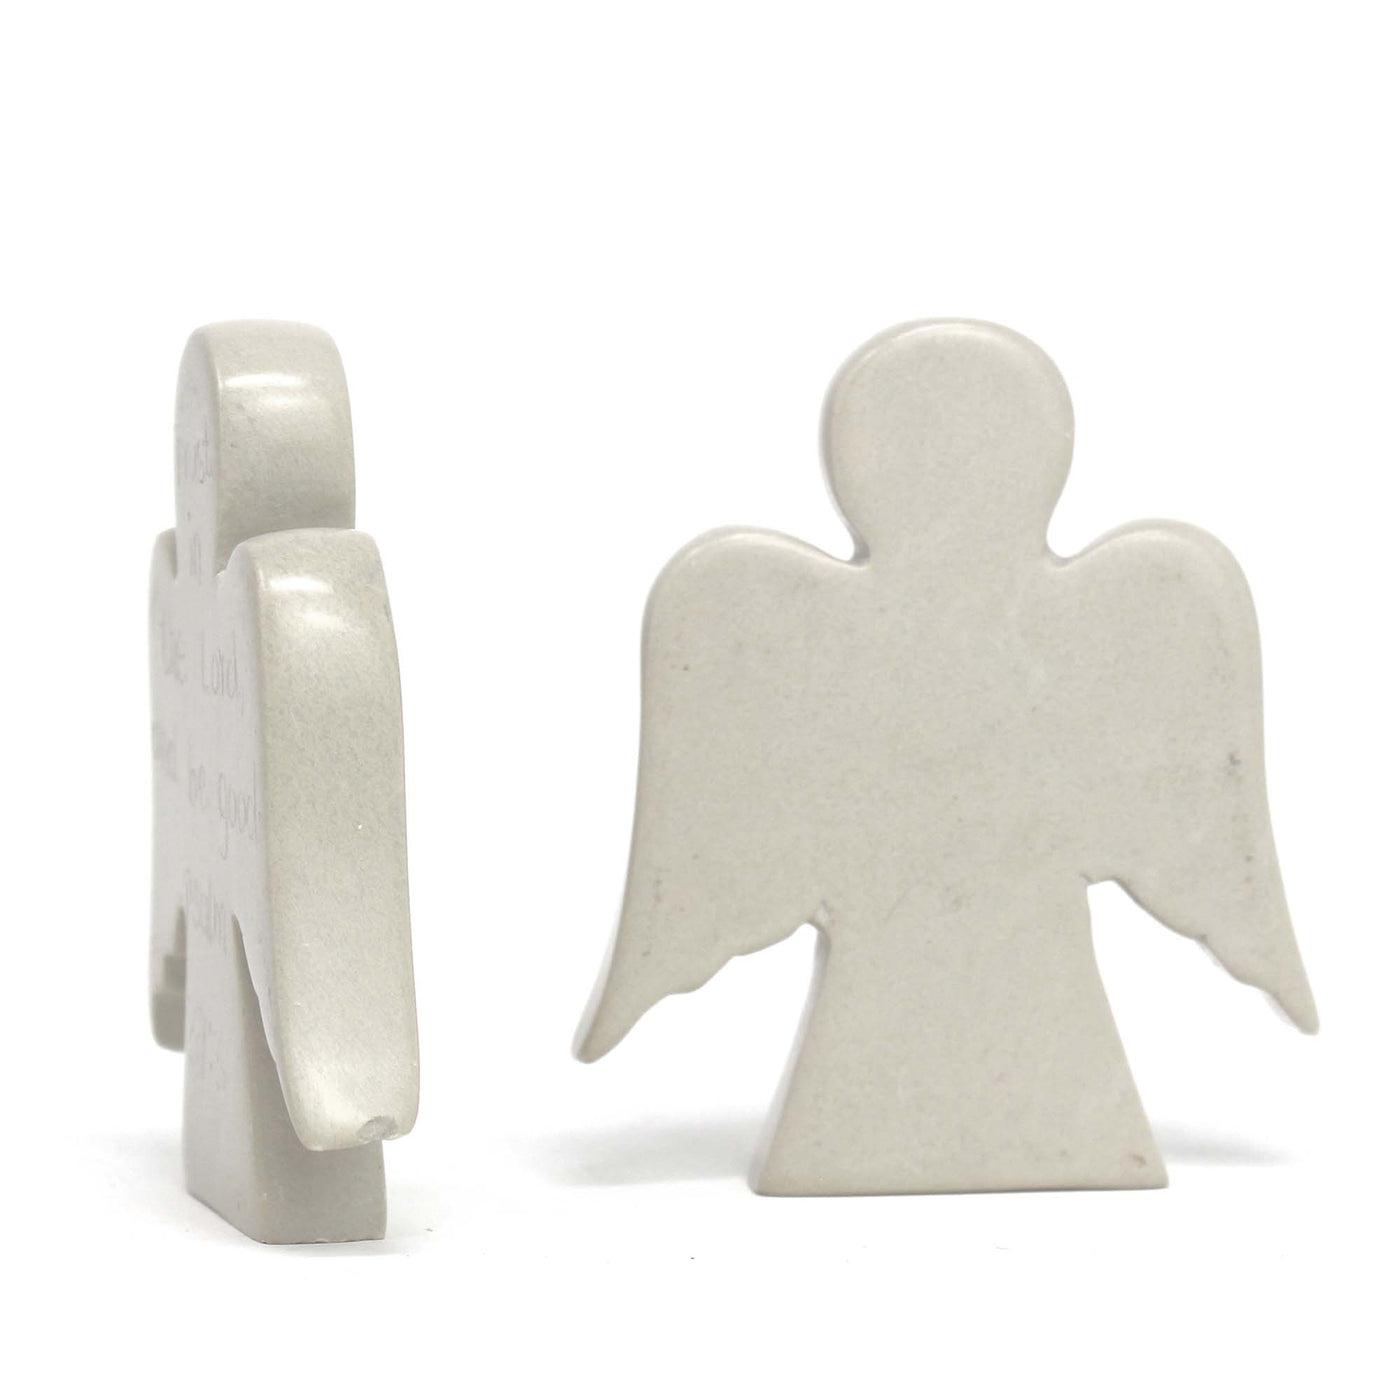 Angel Devotional Tokens with Psalm Inscriptions, Set of 2 - Yvonne’s 100th Wish Inc